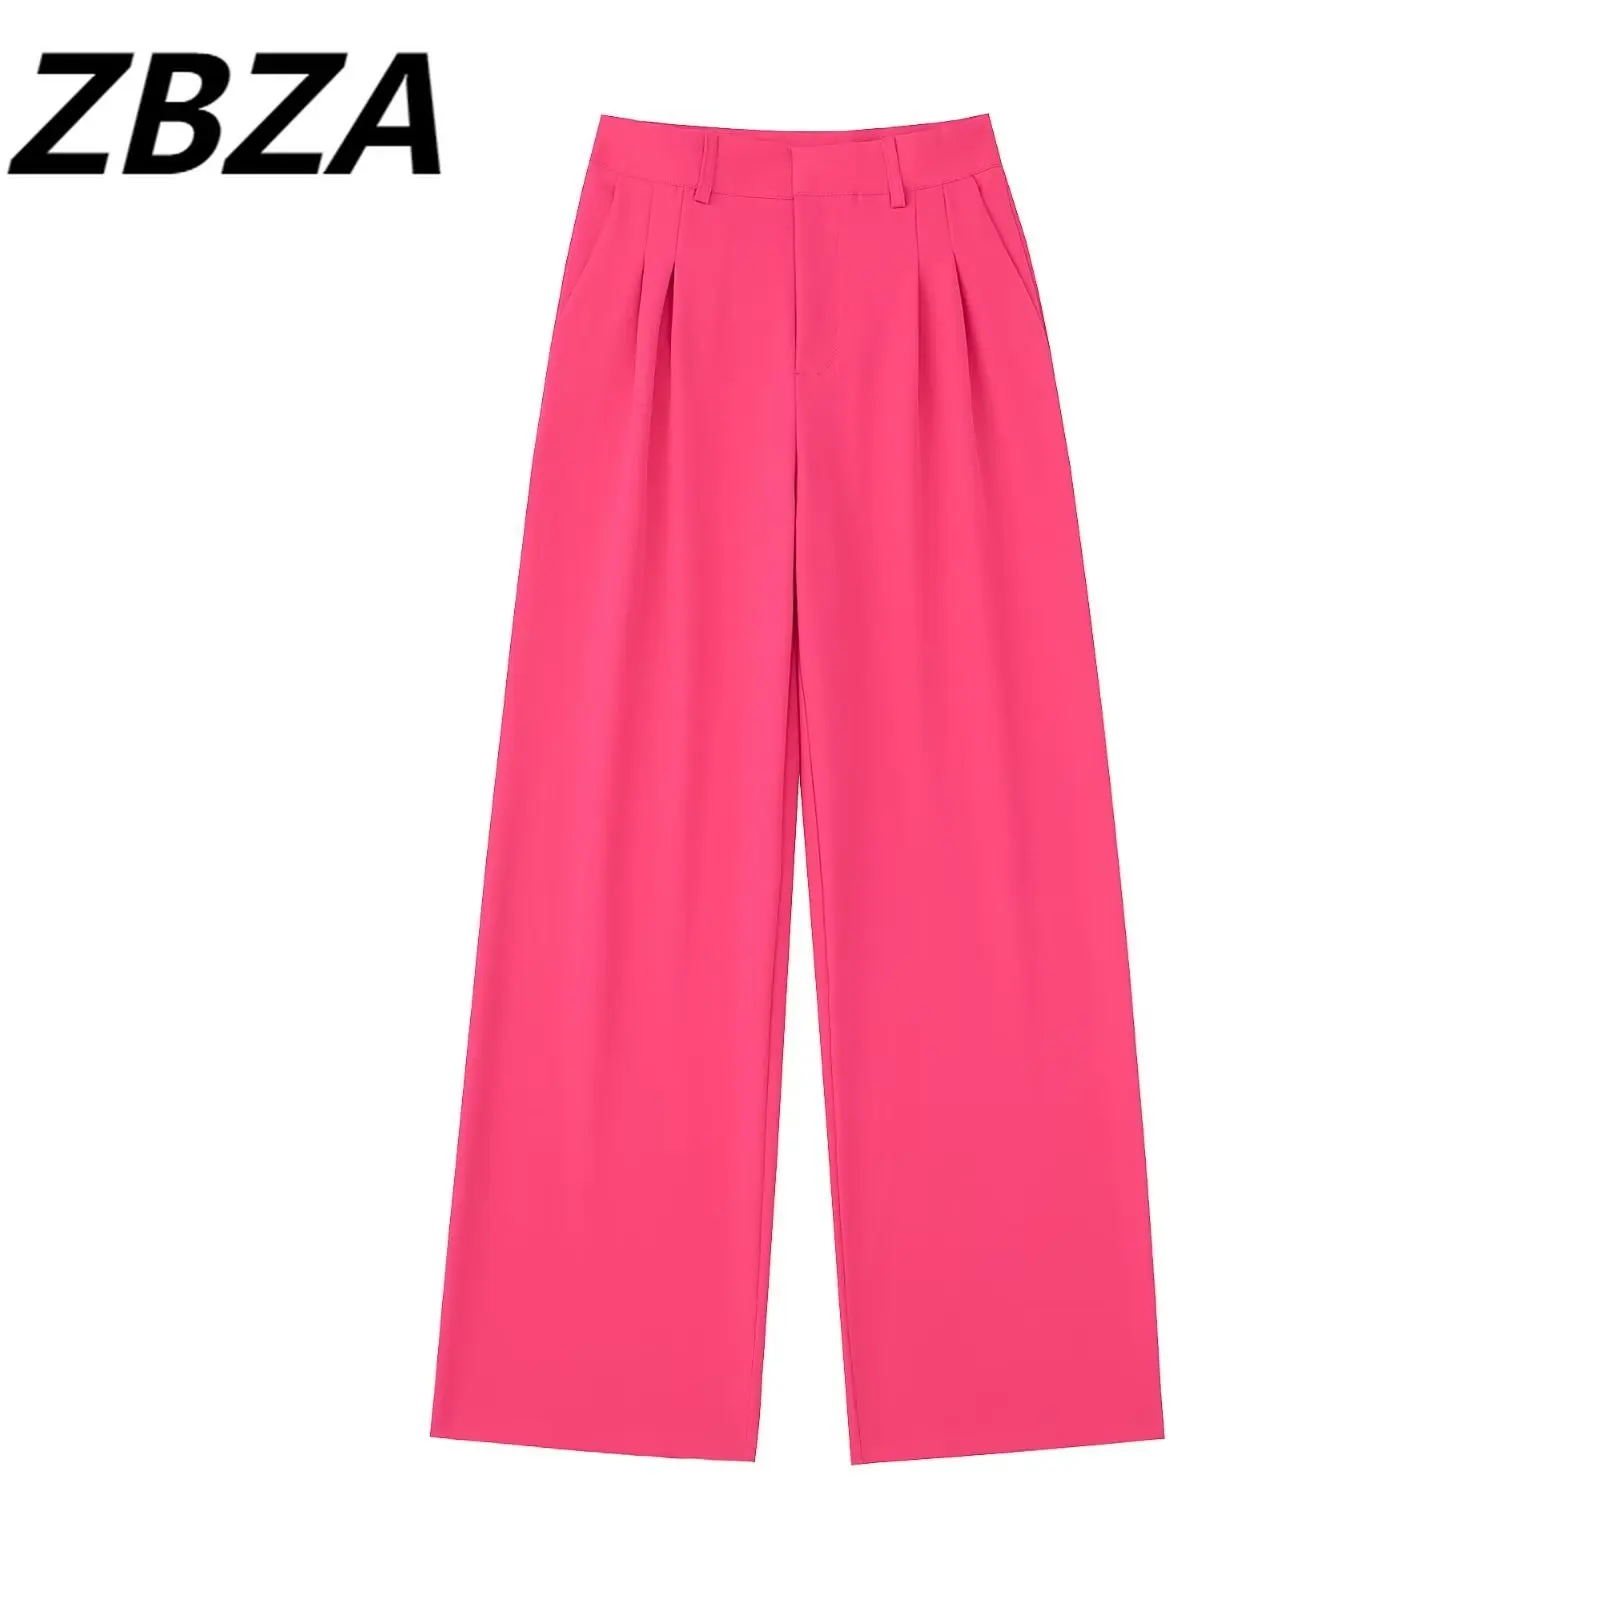 

ZBZA Women 2023 New Chic Fashion Summer 2 Colors Side Pockets Relaxed Long Pants Vintage High-waisted Leisure Female Trousers